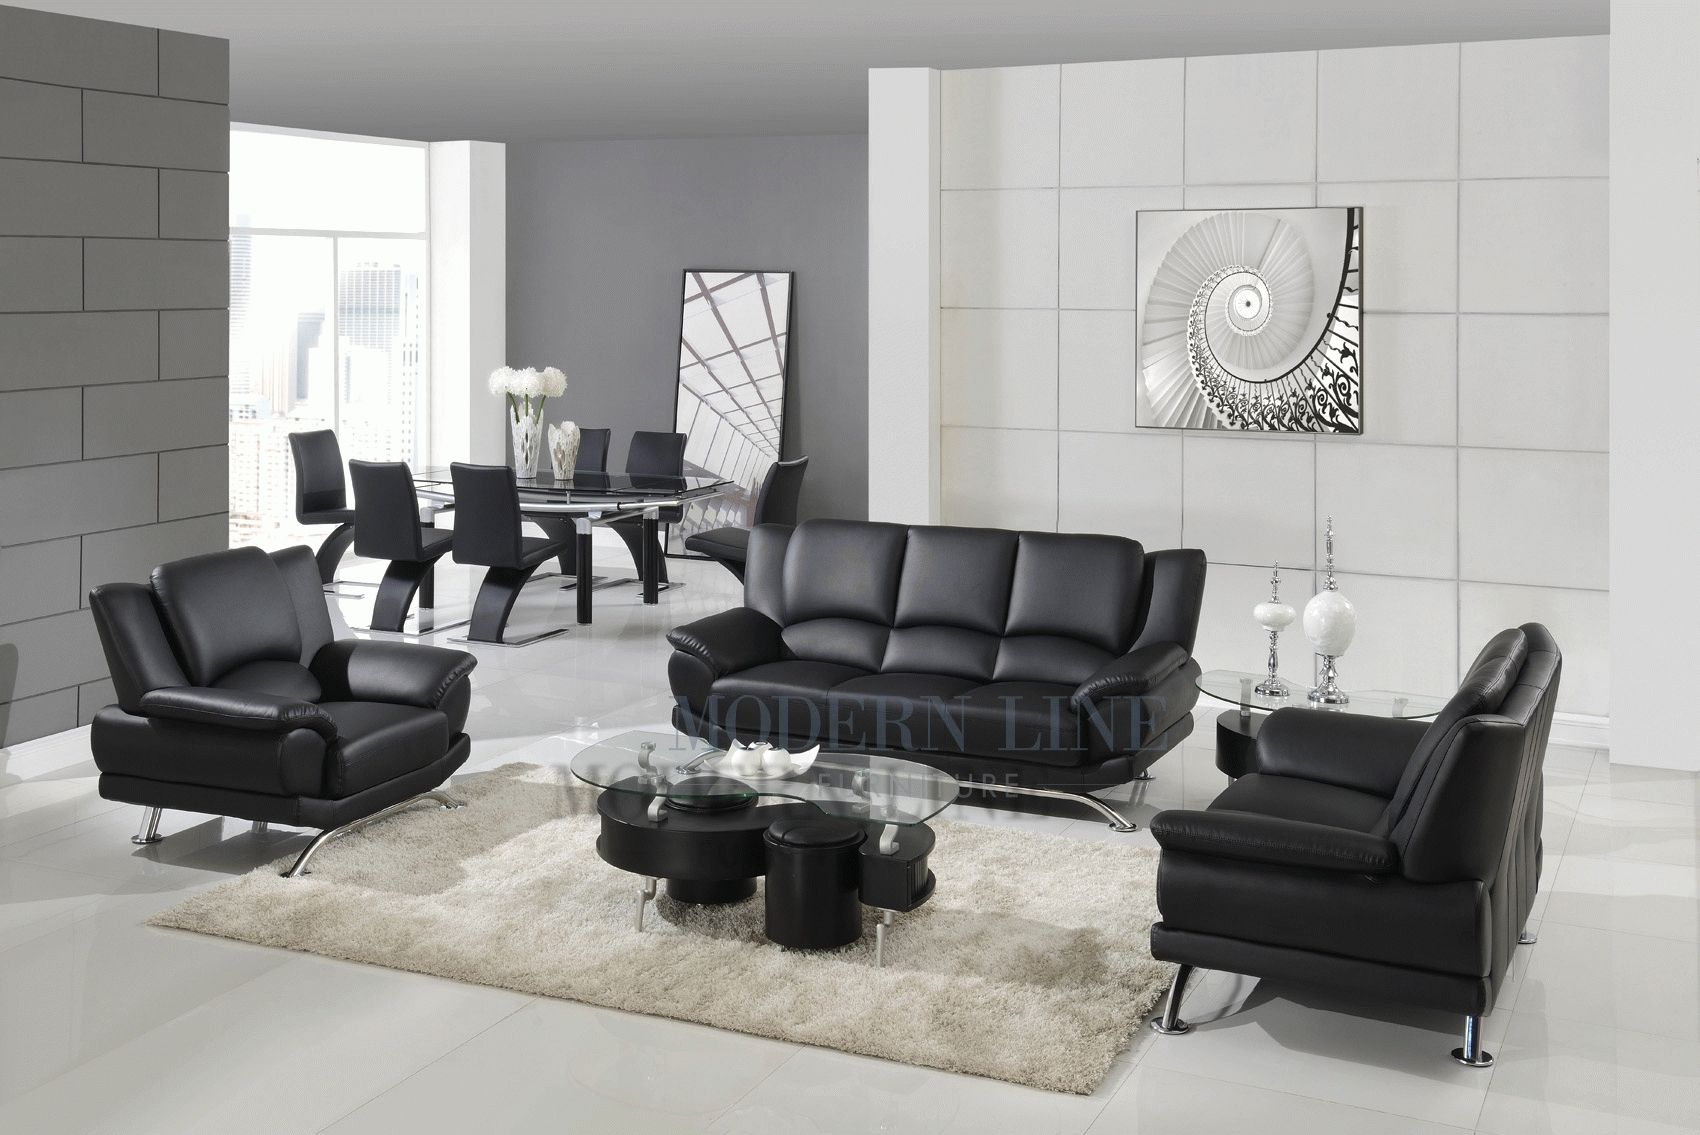 Black Leather Sofa And Loveseat Set With Design Picture 25800 With Regard To Black Leather Sofas And Loveseat Sets (View 17 of 20)